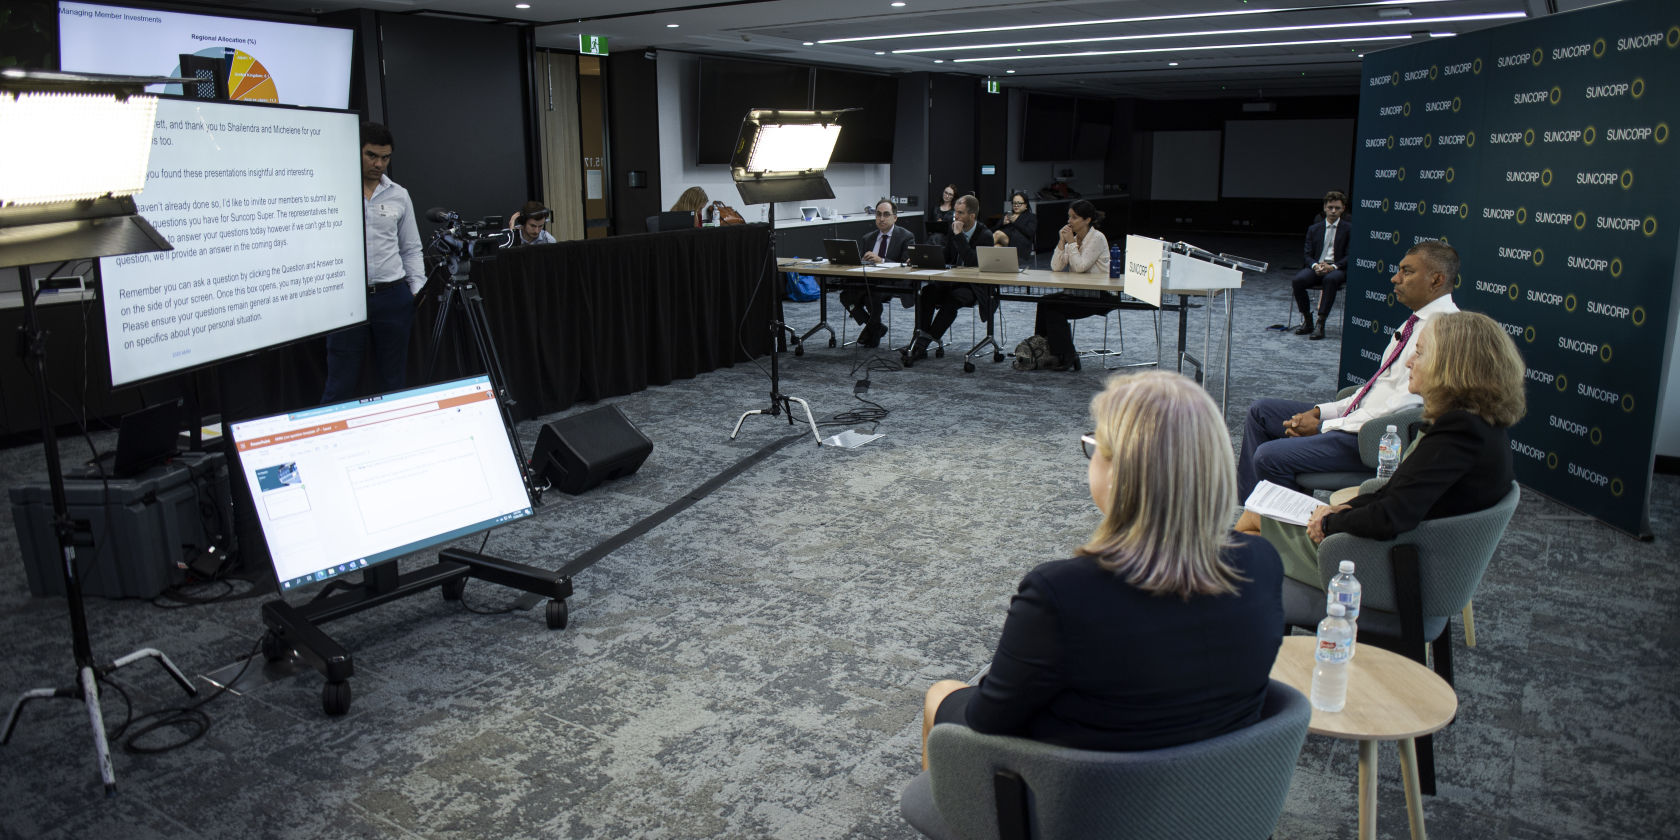 Suncorp hosts first Superannuation Annual Members Meeting